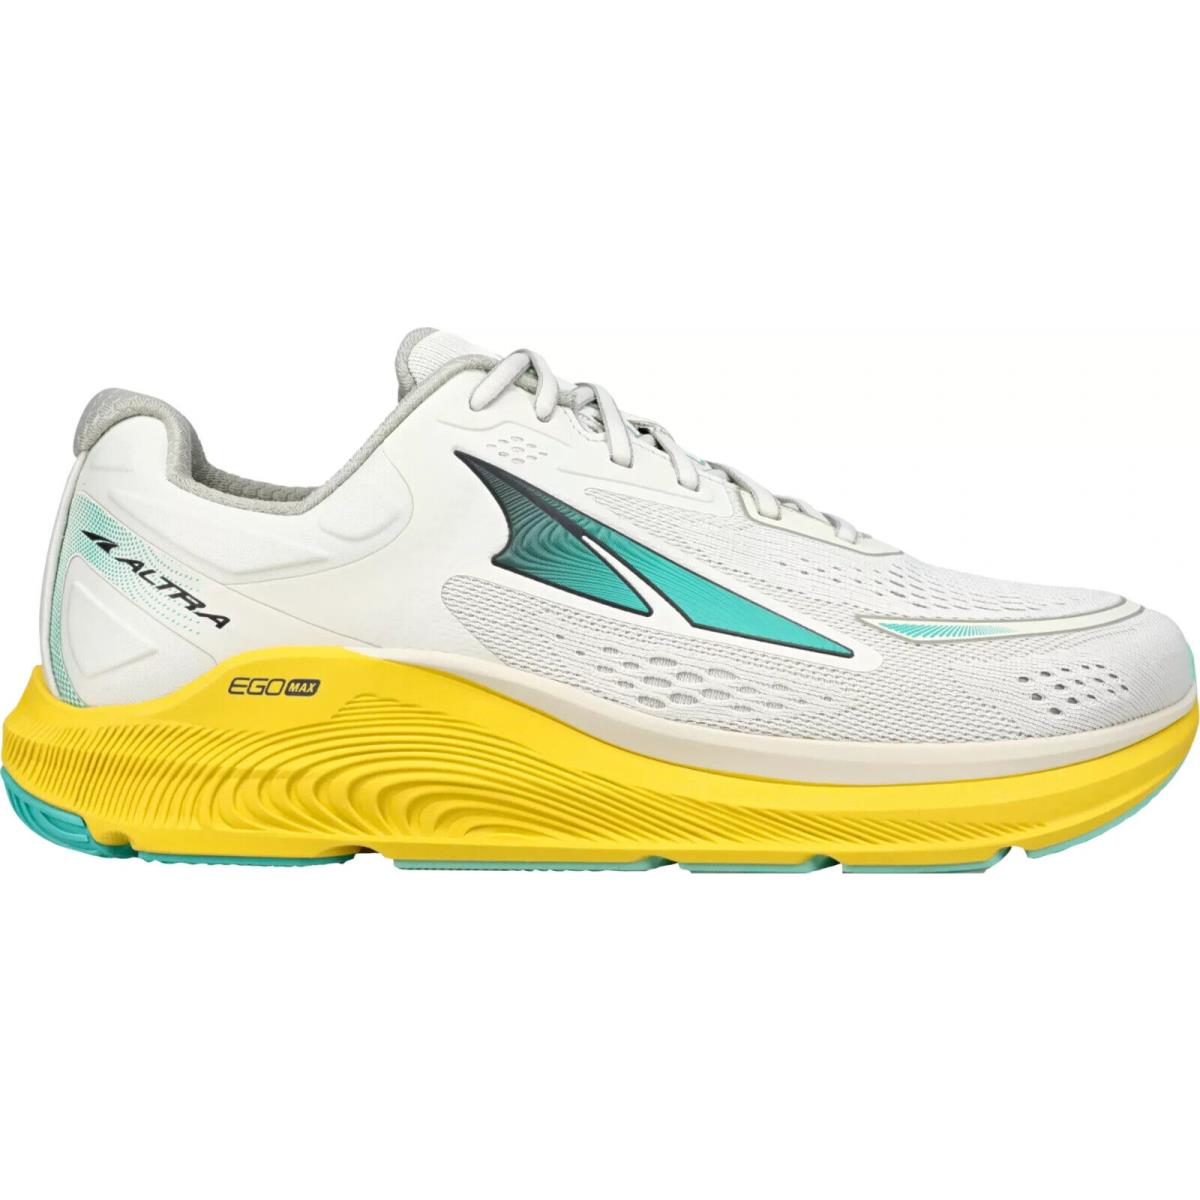 Altra Paradigm 6 Running Shoes Men`s Size 12 Gray/yellow AL0A5471270-120 - Gray/Yellow, Manufacturer: Gray/Yellow